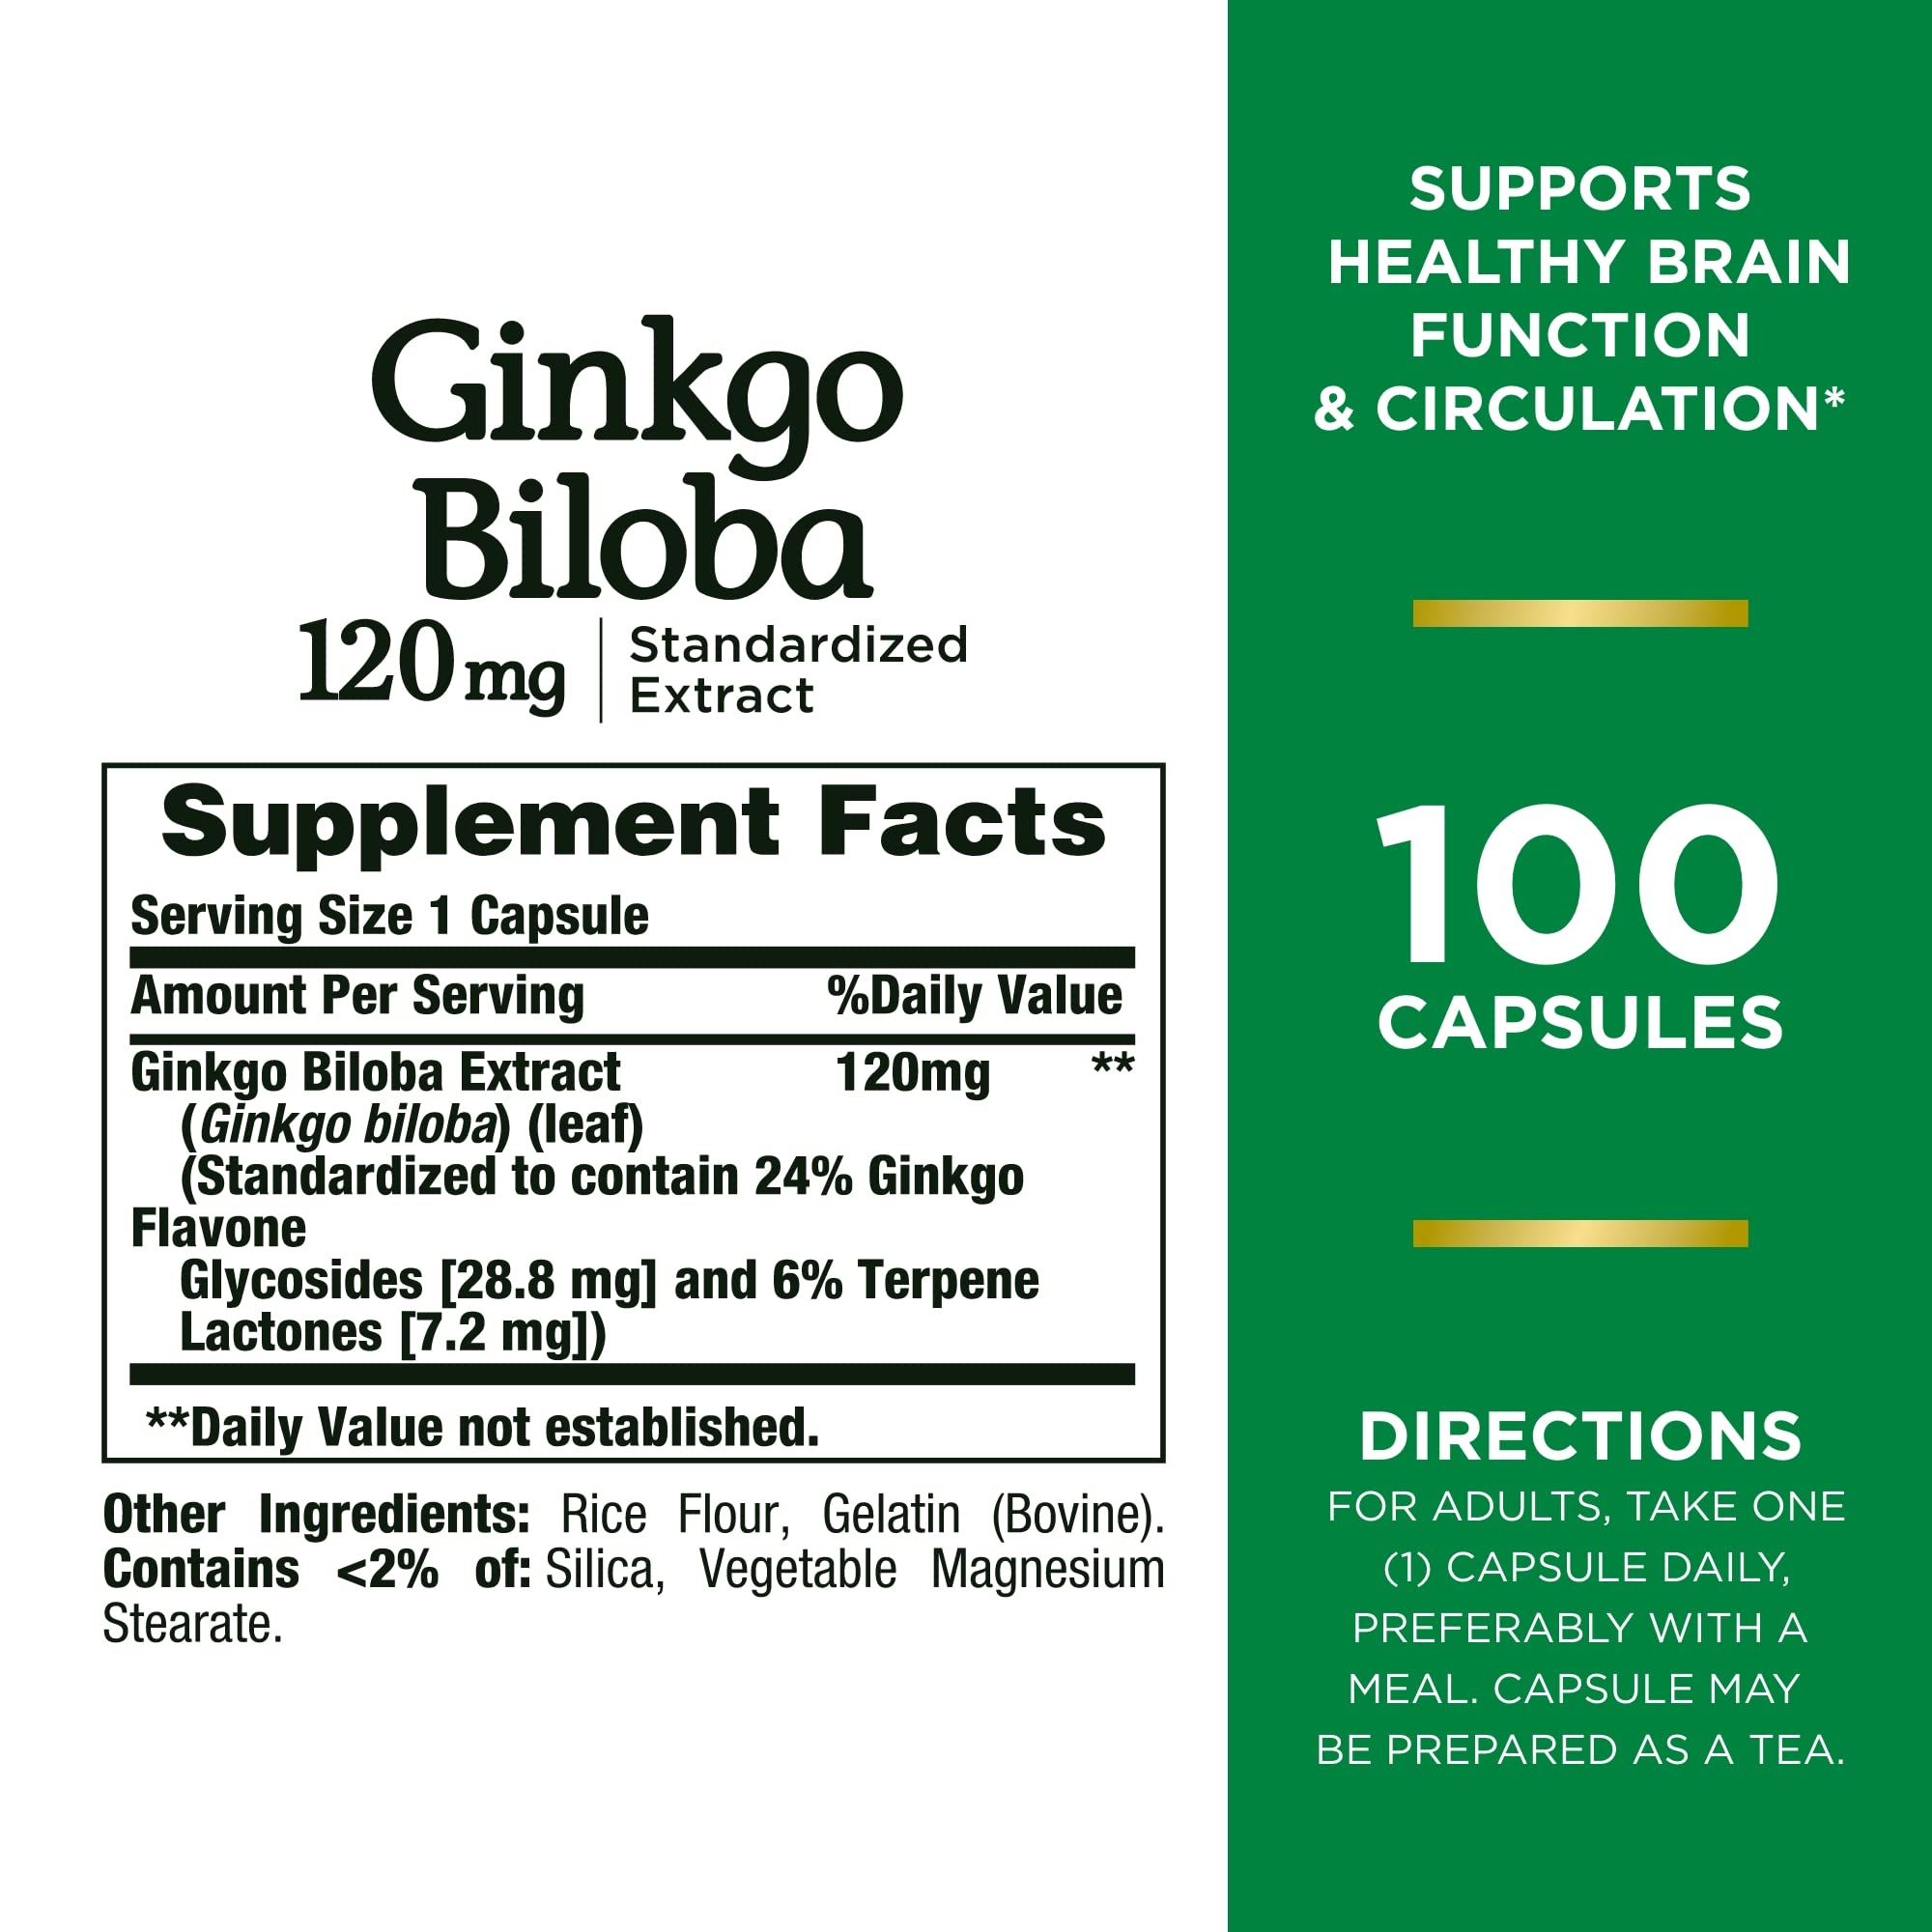 Nature's Bounty Ginkgo Biloba Capsules 120mg, Memory Support Supplement, Supports Brain Function and Mental Alertness, 100 Capsules (Pack of 3)